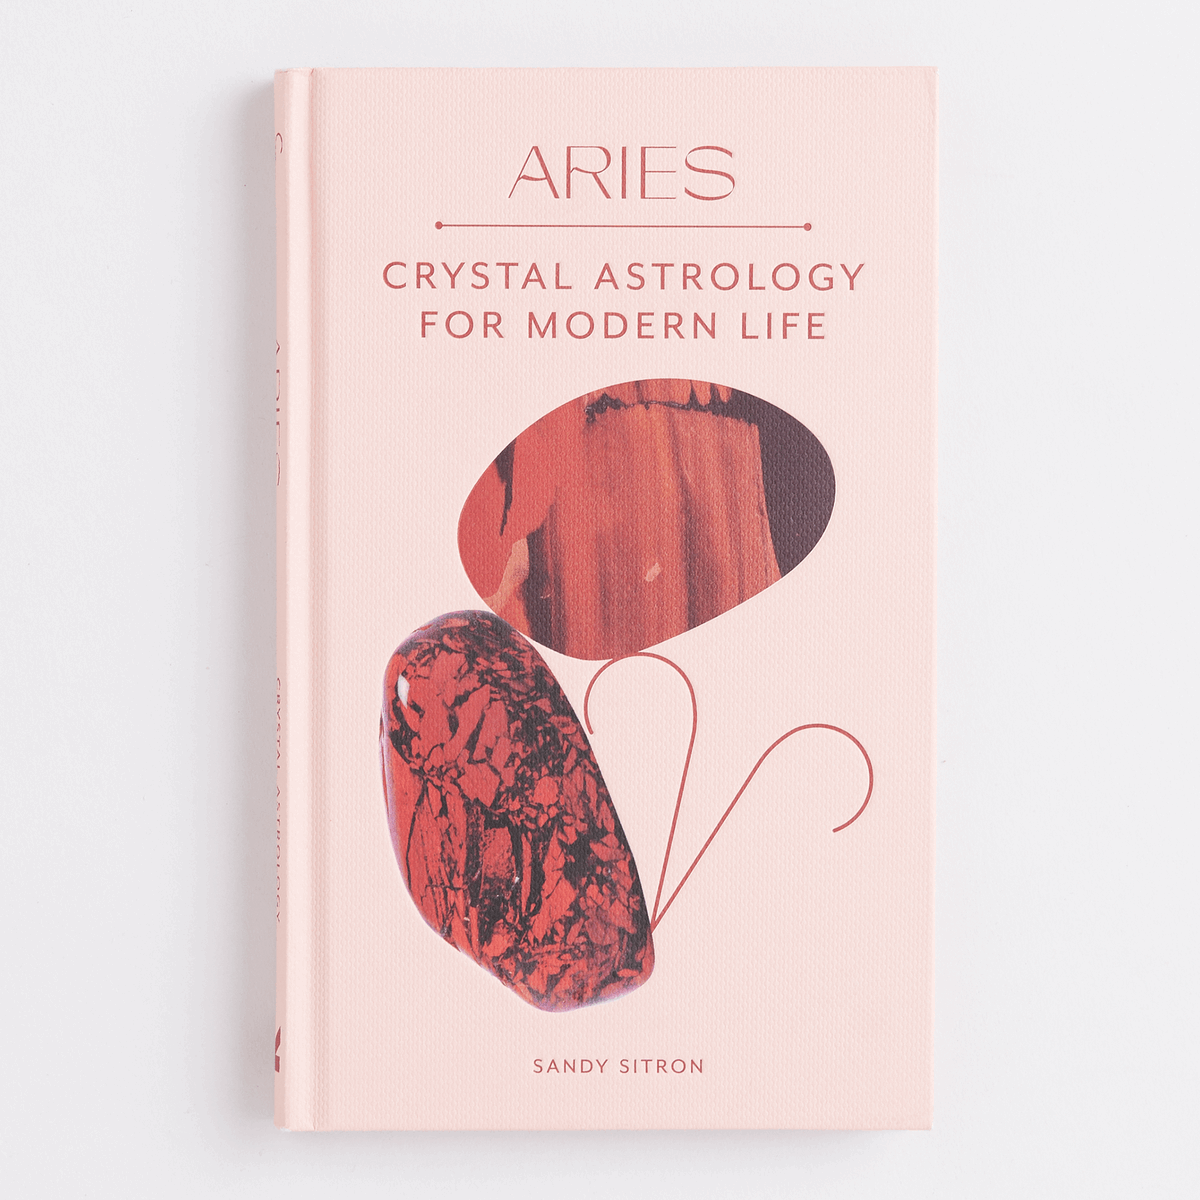 Copy of Crystal Astrology for the modern life | Aries | Sandy Sitron